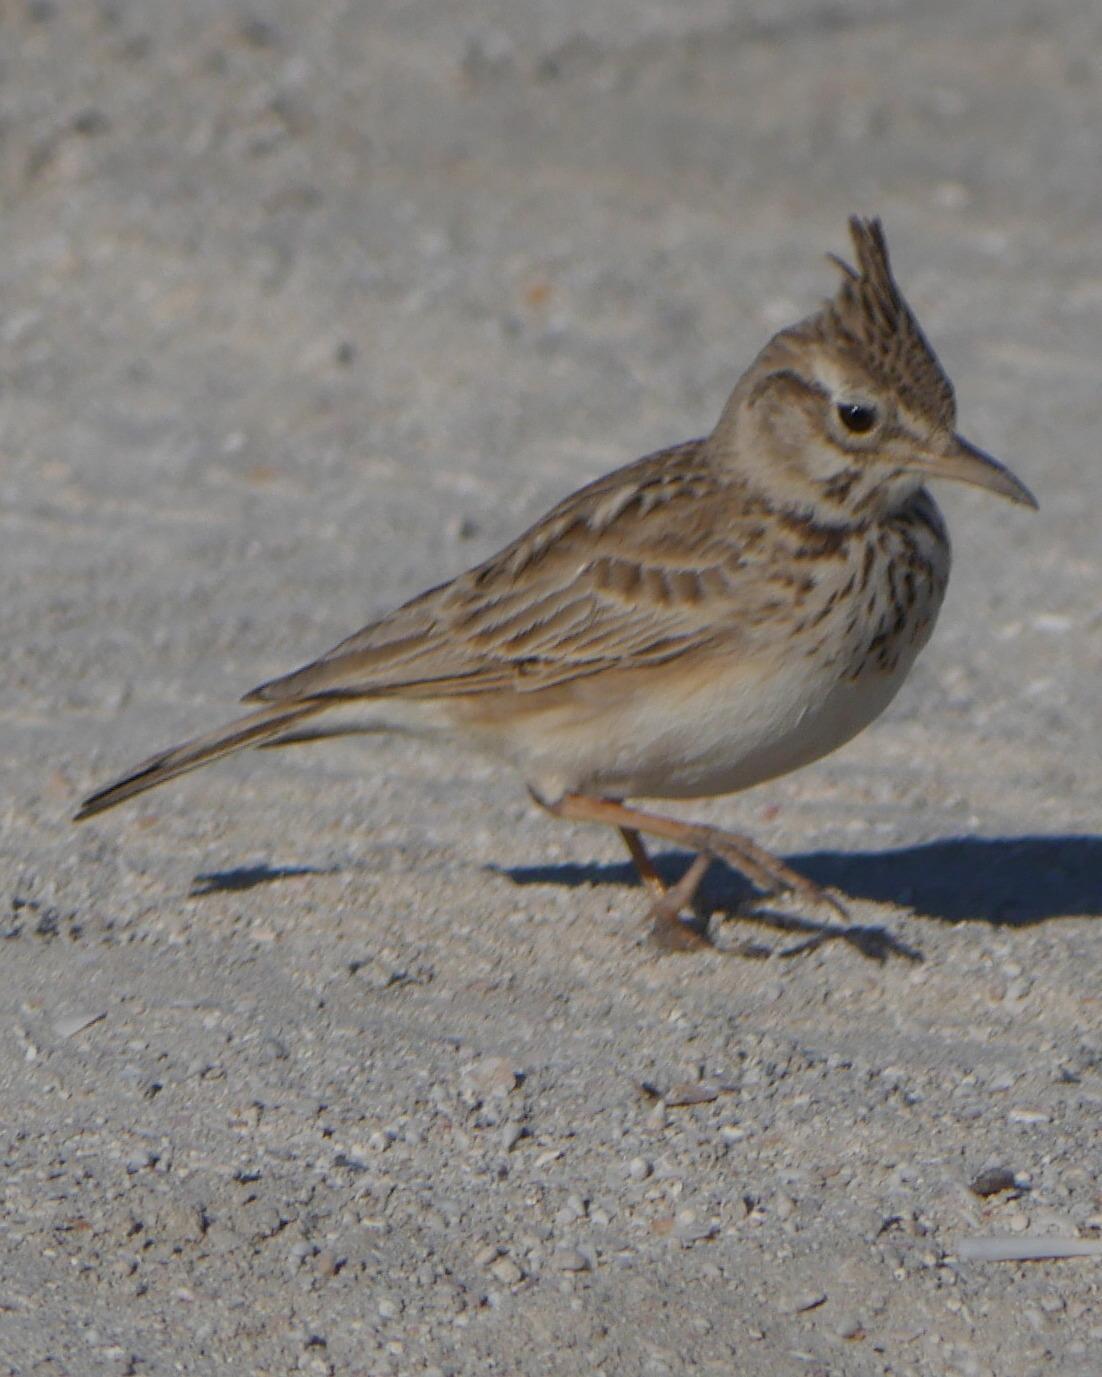 Crested/Maghreb Lark Photo by Peter Lowe